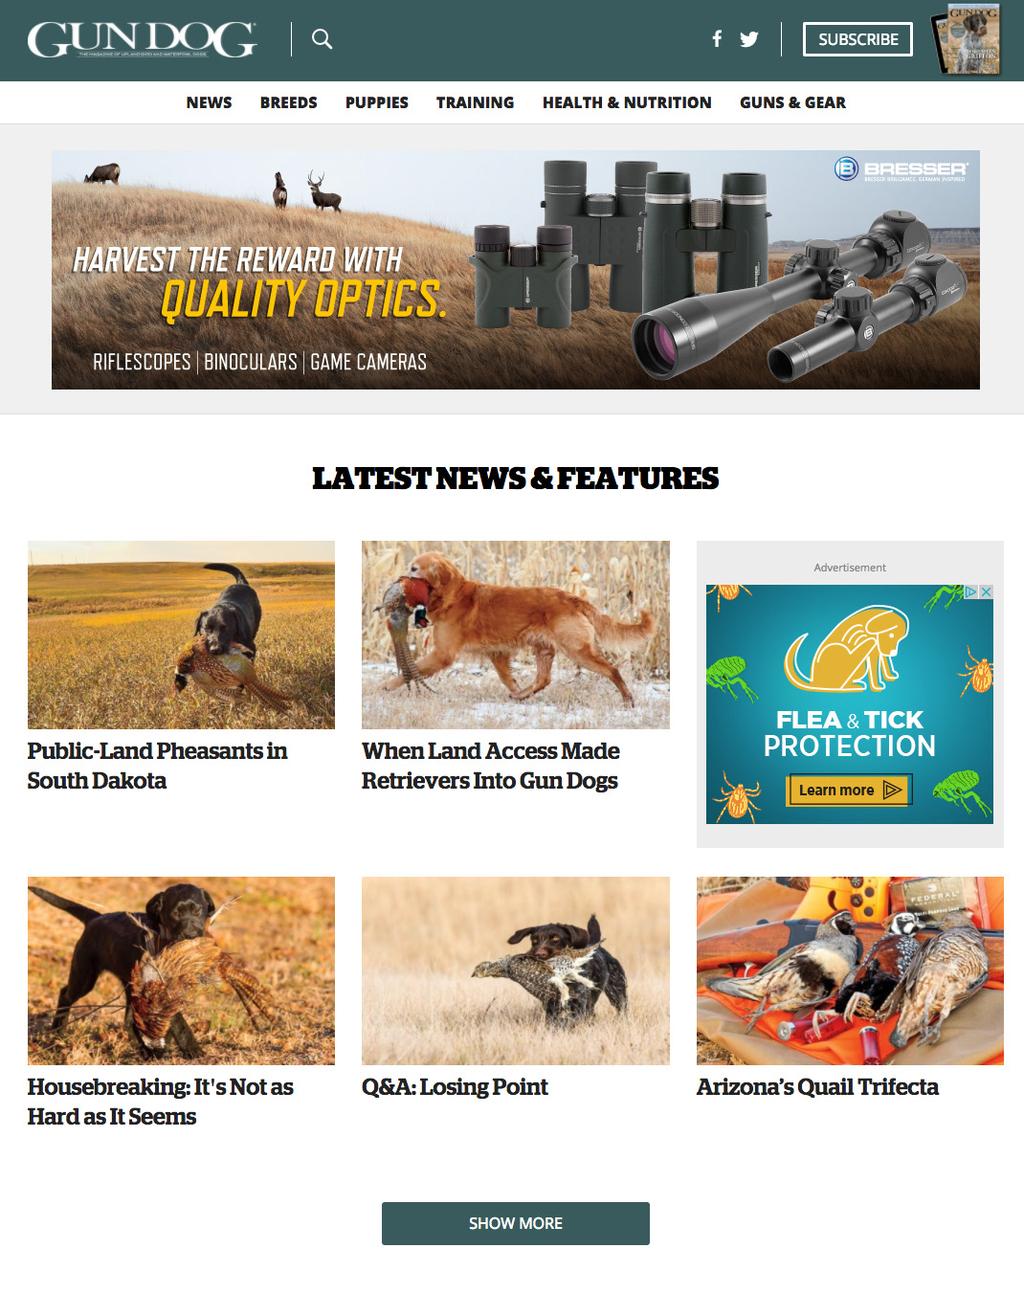 Digital Audience/Gun Dog Gun Dog online adds a valuable dimension to the brand by